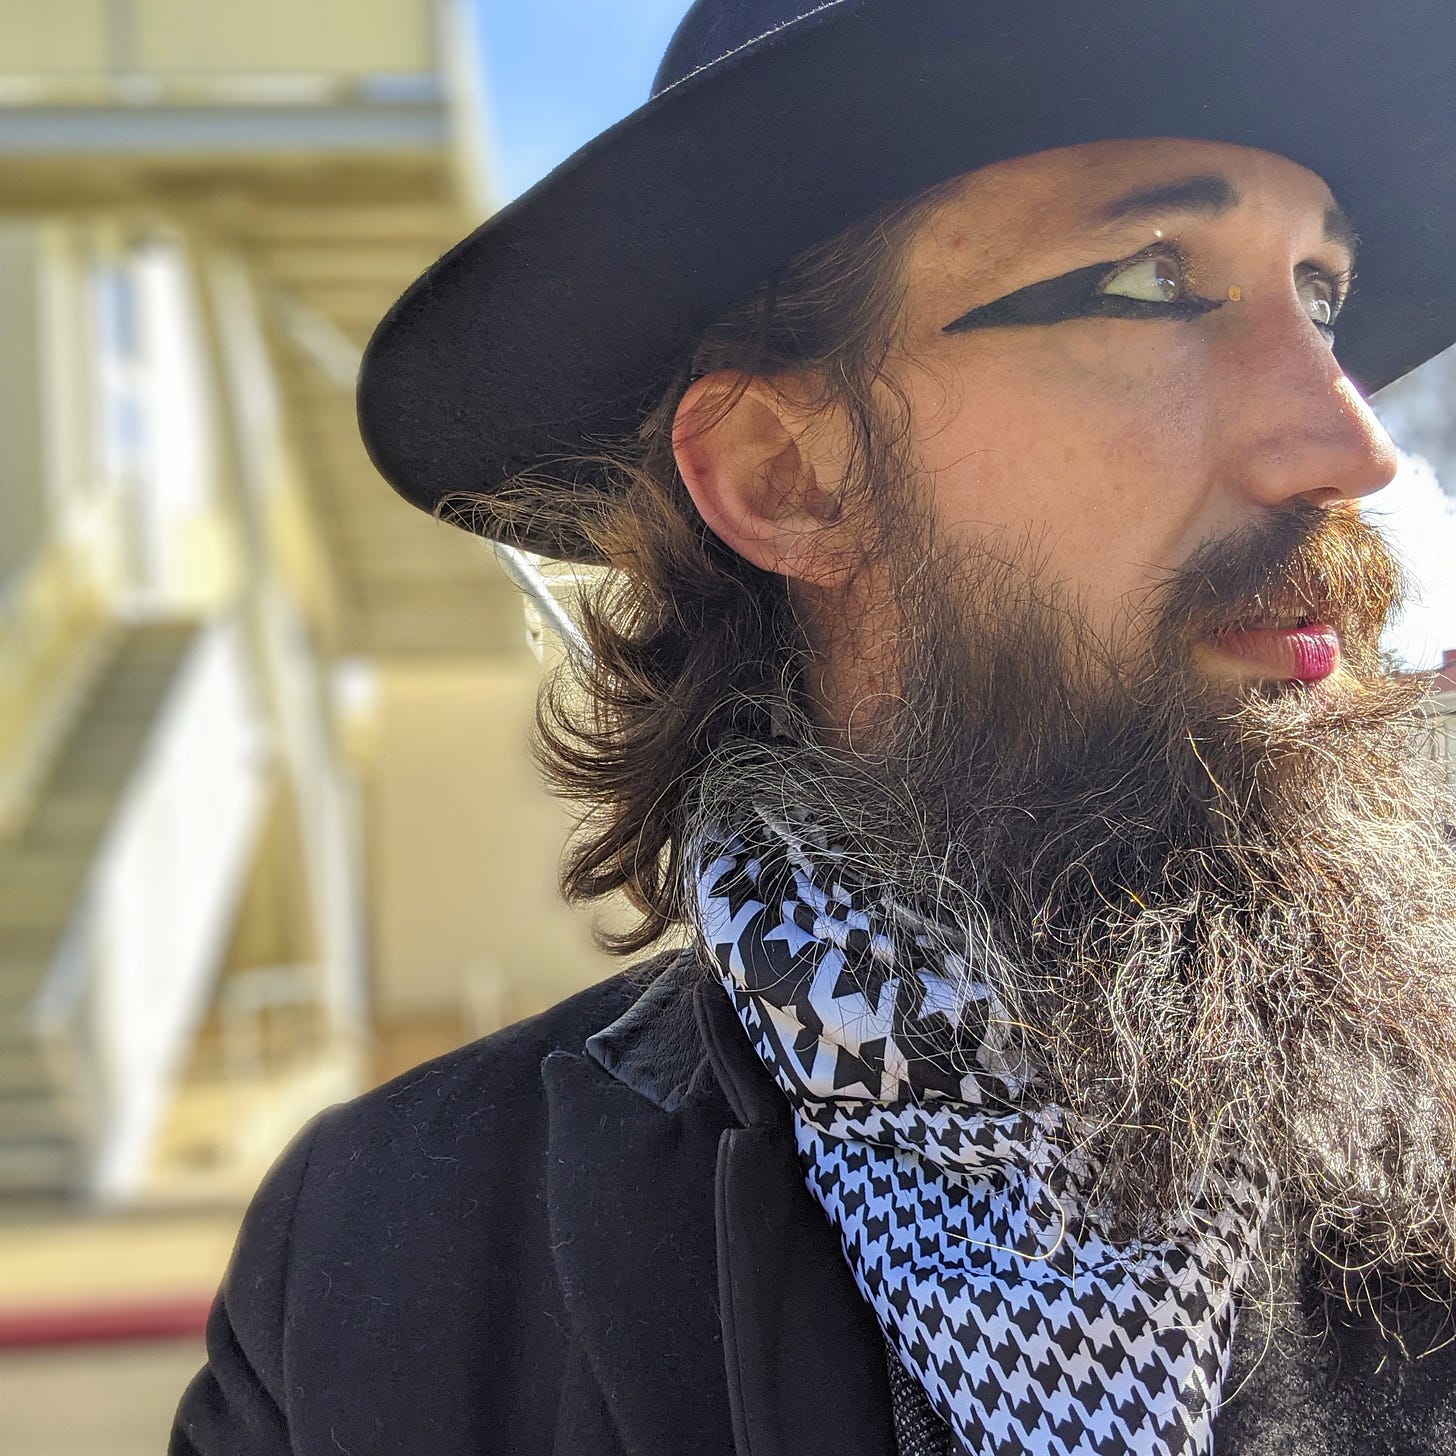 Jason Wyman looking to he right with the sun on their face. Jason is wearing a black wide-brimmed har with long brown hair and a long bushy beard. Jason has a houndstooth silk scarf on and a black wool coat. Jason is wearing bold black eyeliner and a pink lip. Jason is set against a blurred out background of a yellow home.